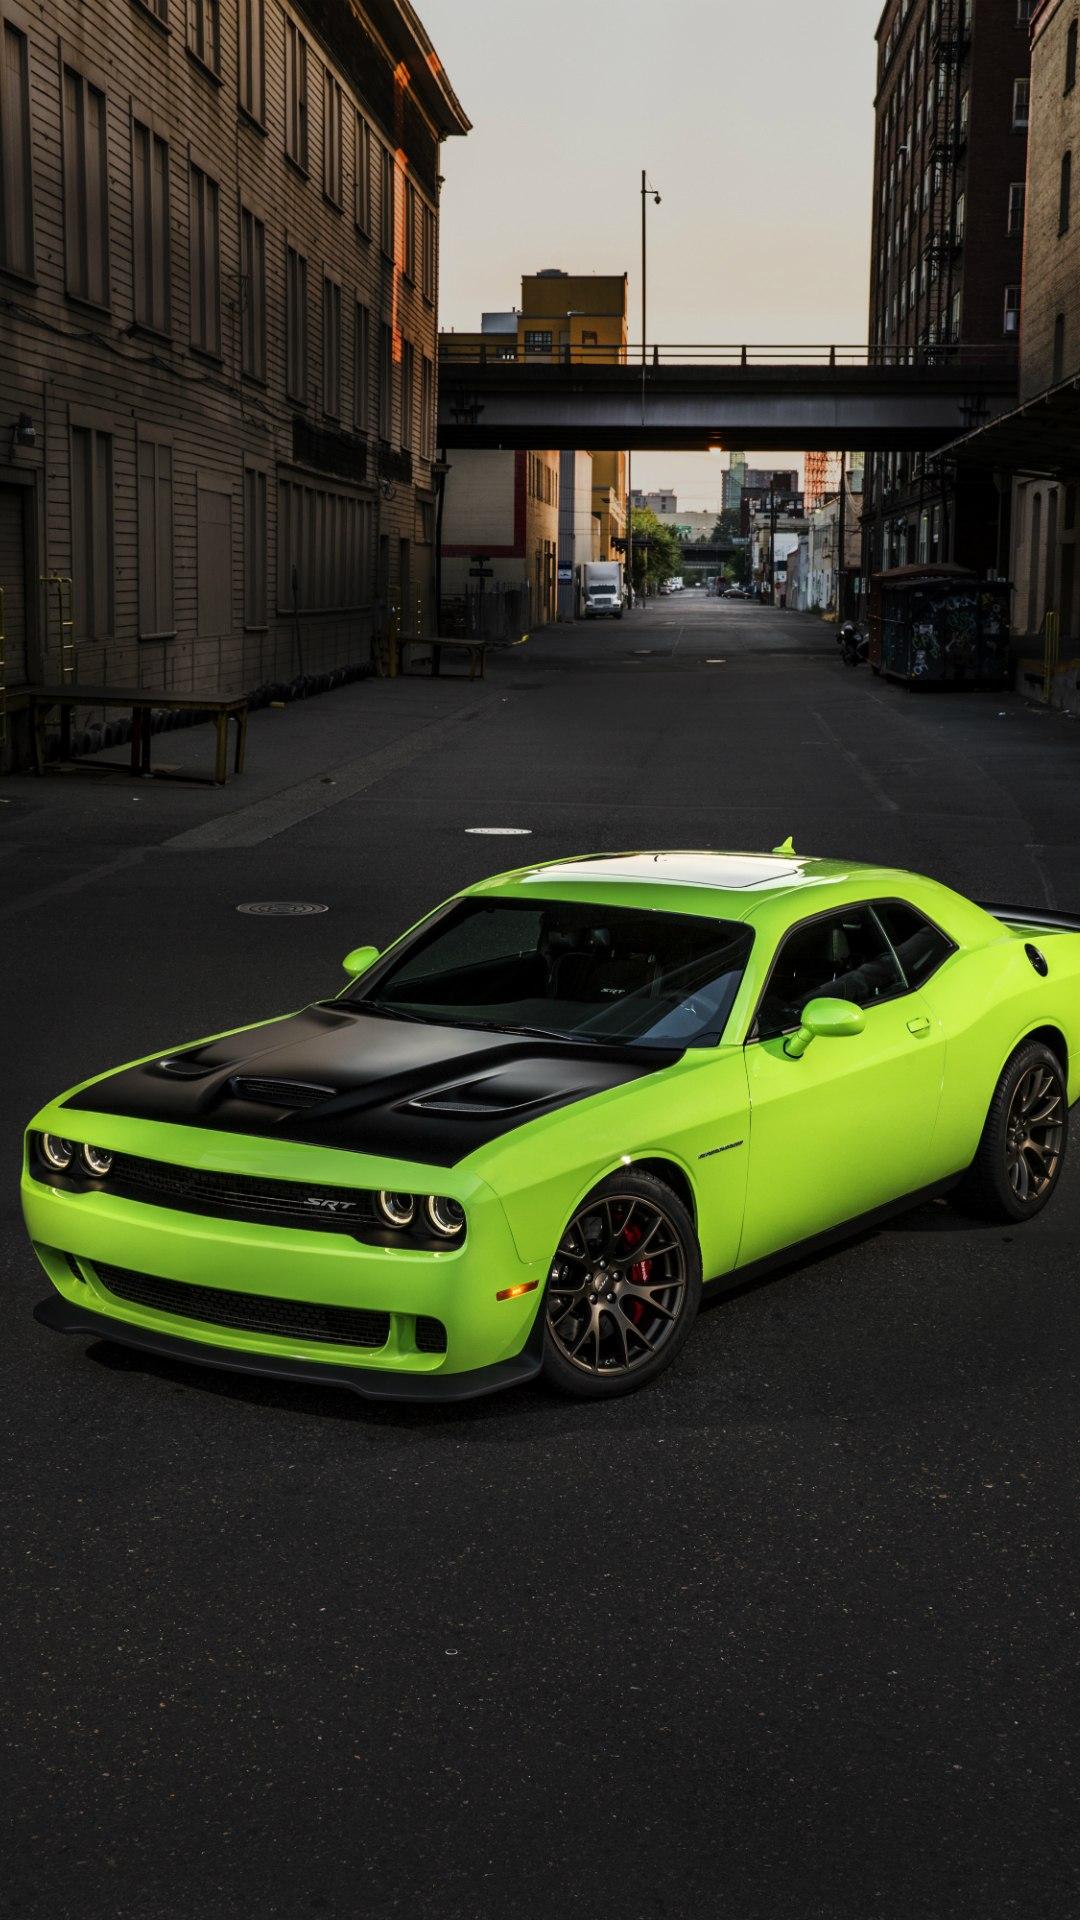 Dodge Challenger Wallpaper For iPhone iPhone HD